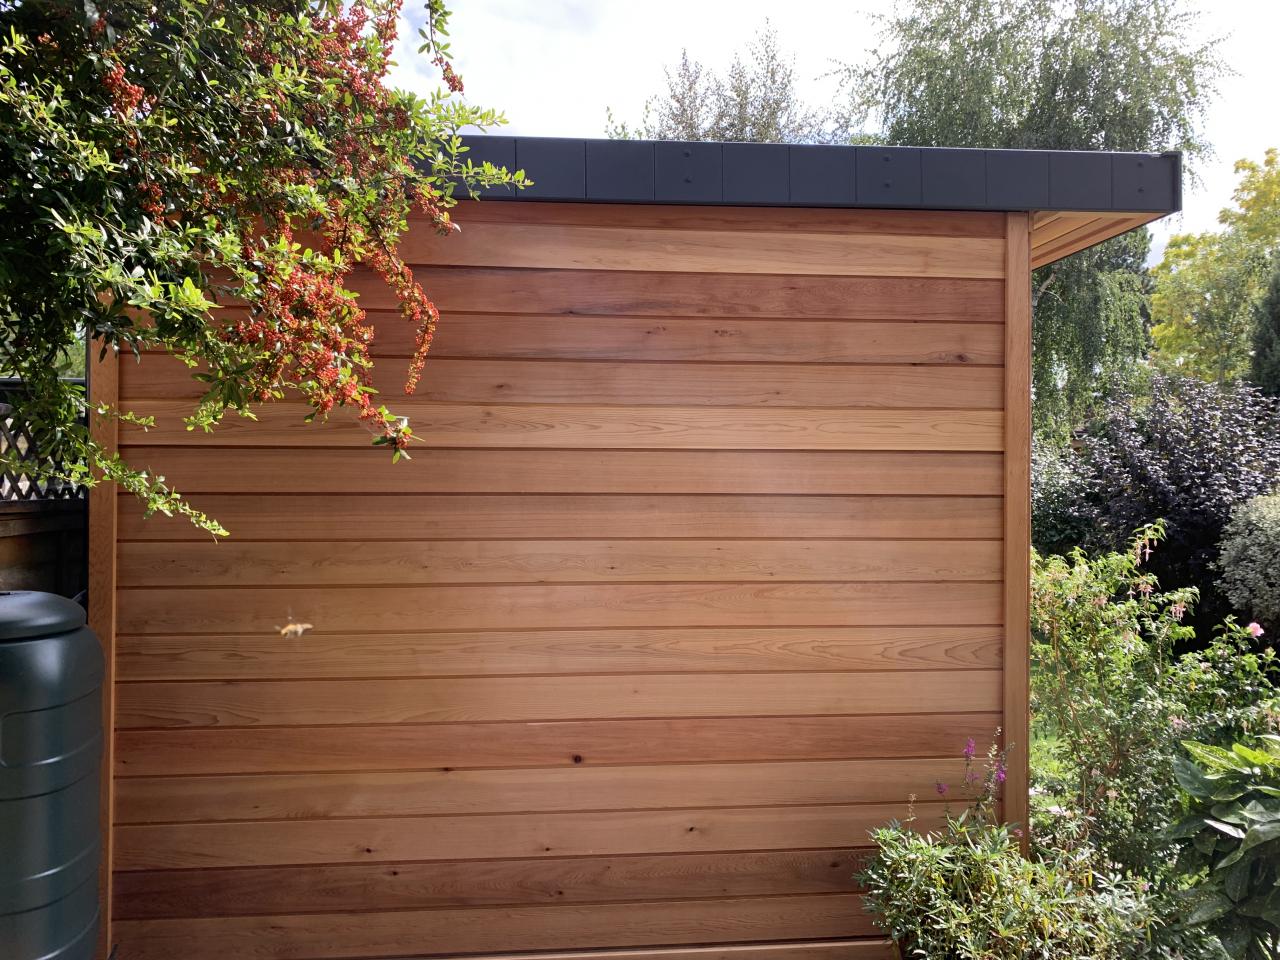 This was the first building delivered by us that used the popular option of cedar cladding. 

They wanted to enjoy the benefits of our modern construction techniques but still want a traditional look for their garden rooms. 
